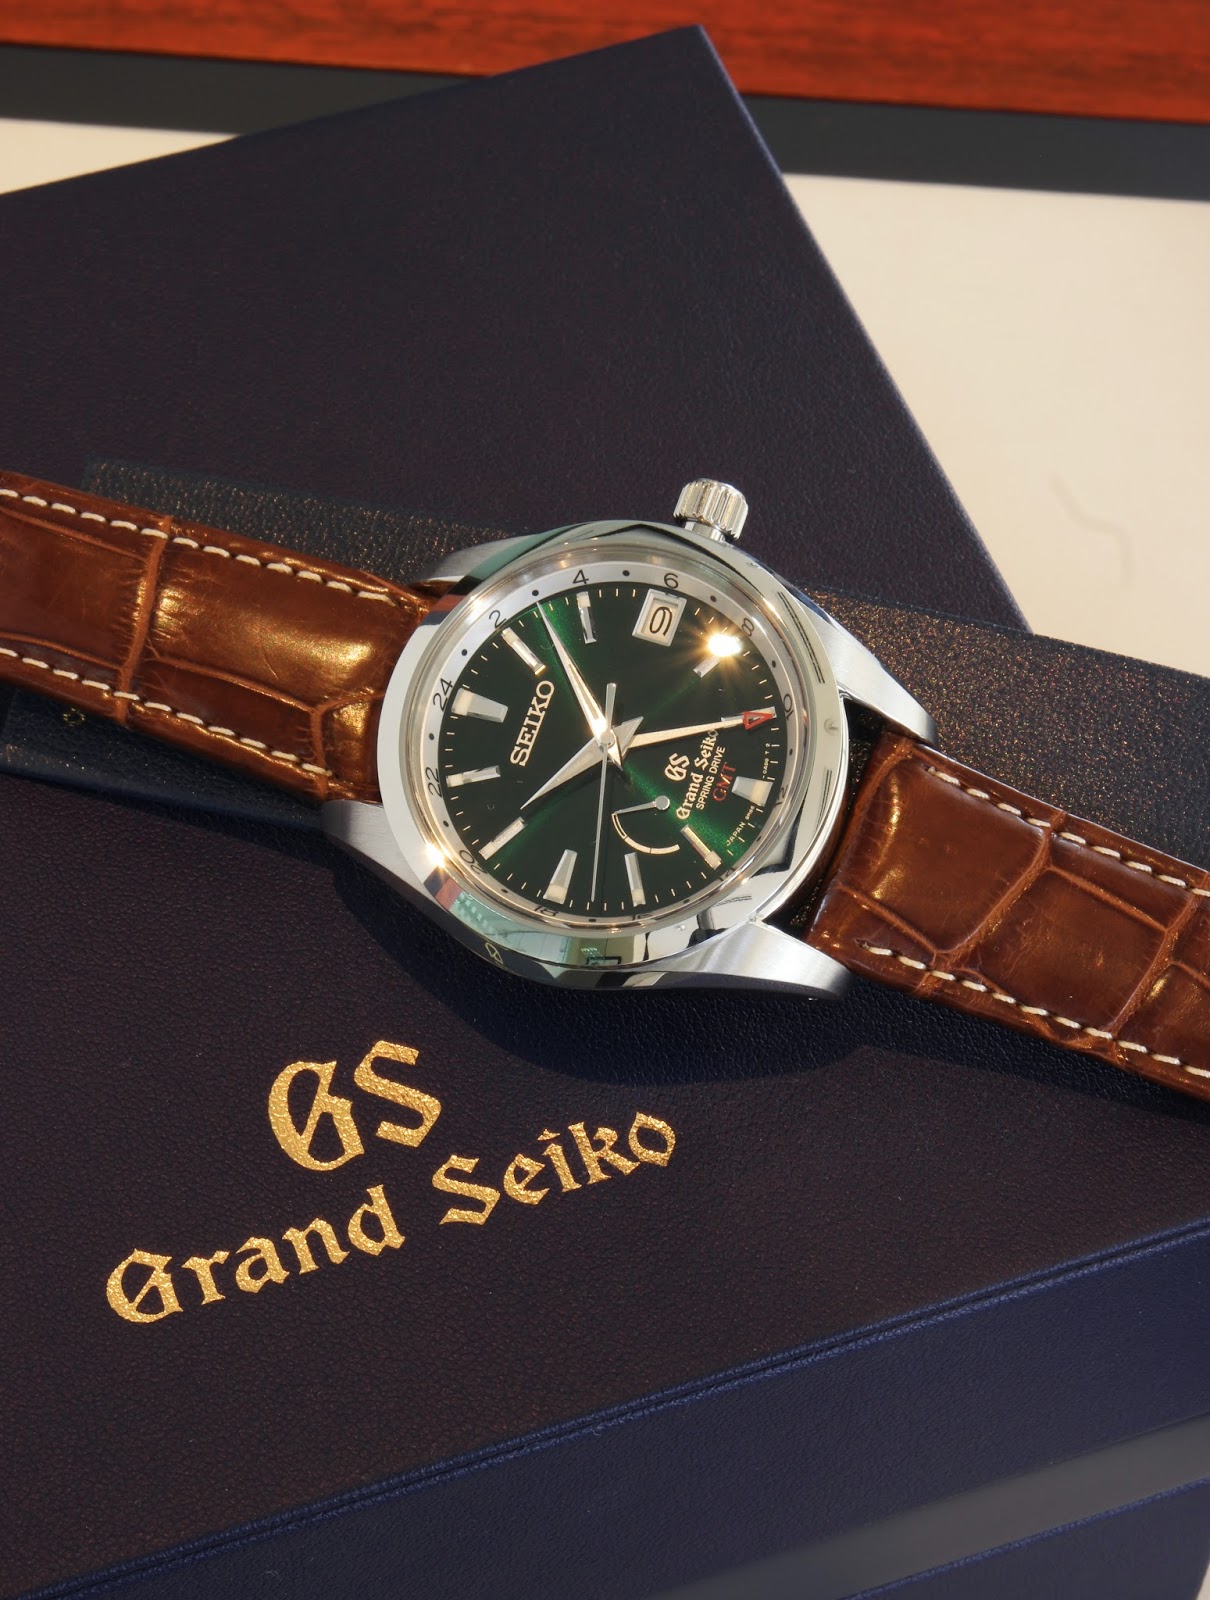 !: Grand Seiko 55th Anniversary Limited Edition Timepieces  revealed in Kuala Lumpur!!!